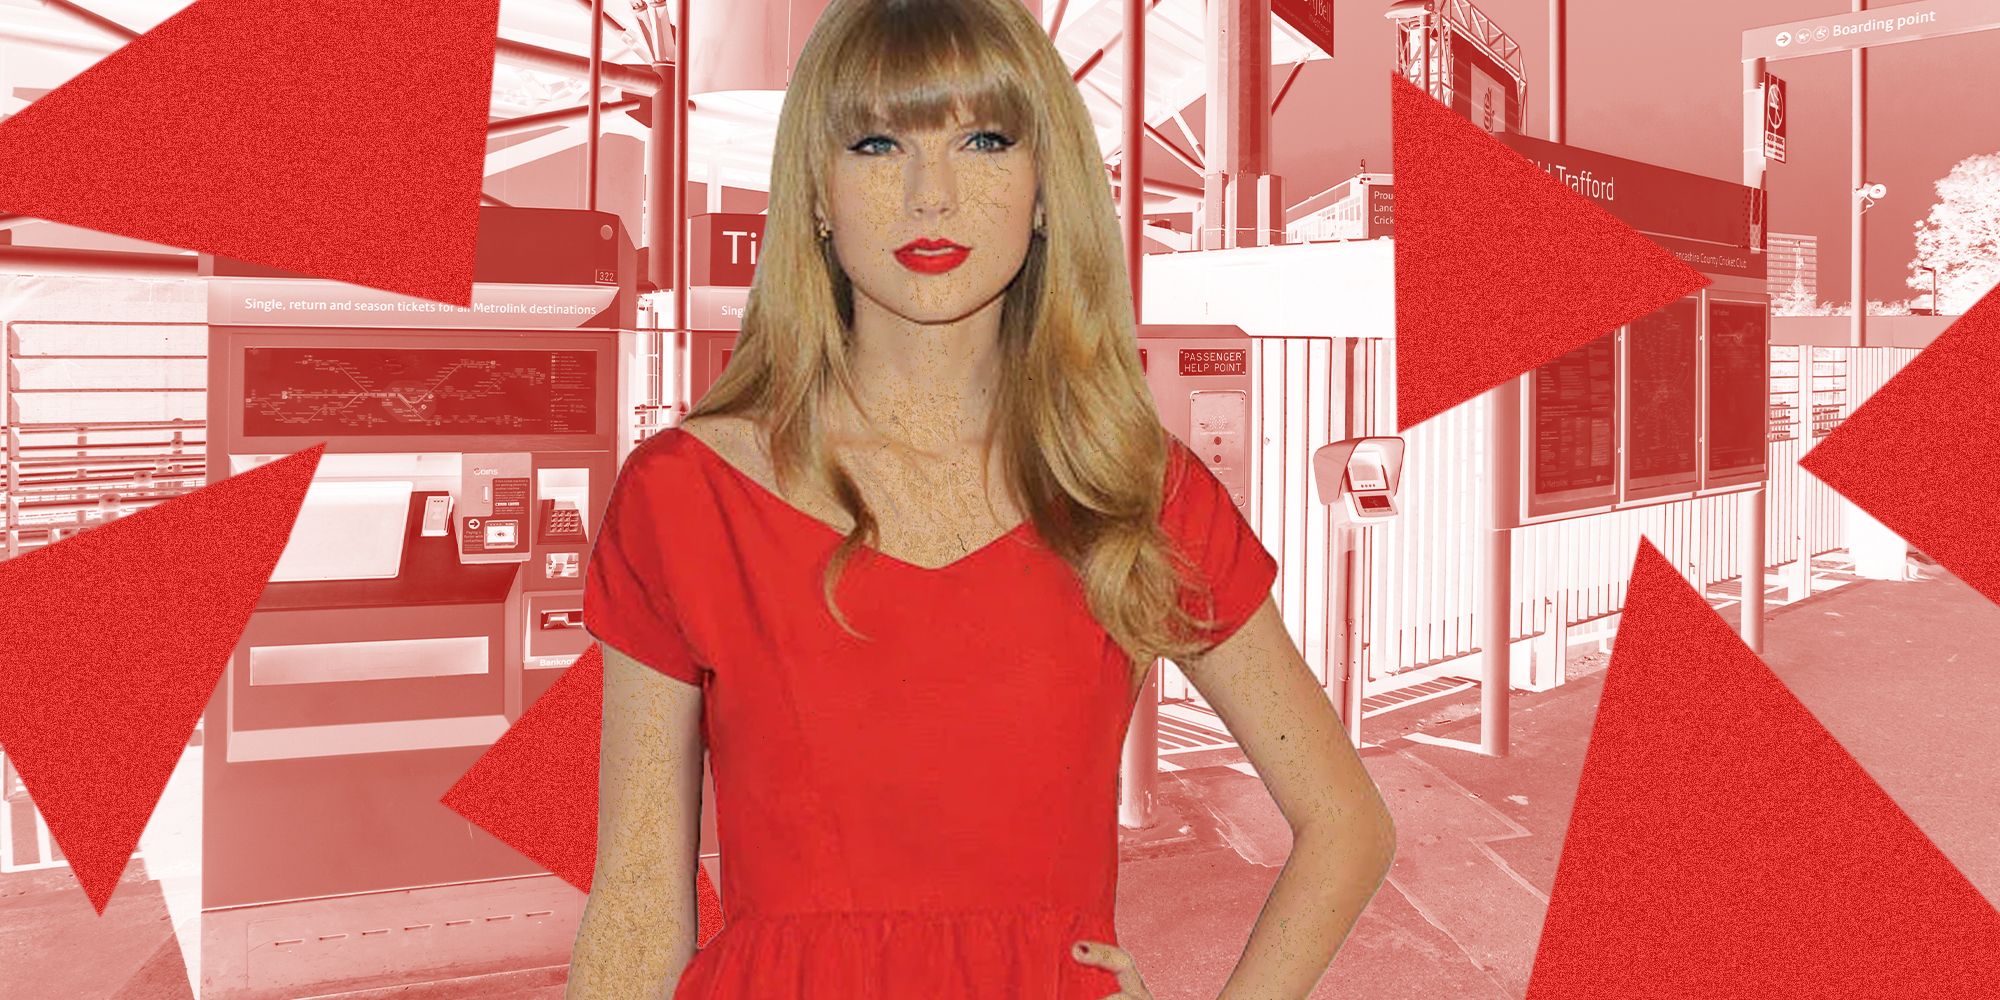 Sheffield and Manchester in tug of love battle over iconic 'TramTaylor' cardboard  cut-out Taylor Swift